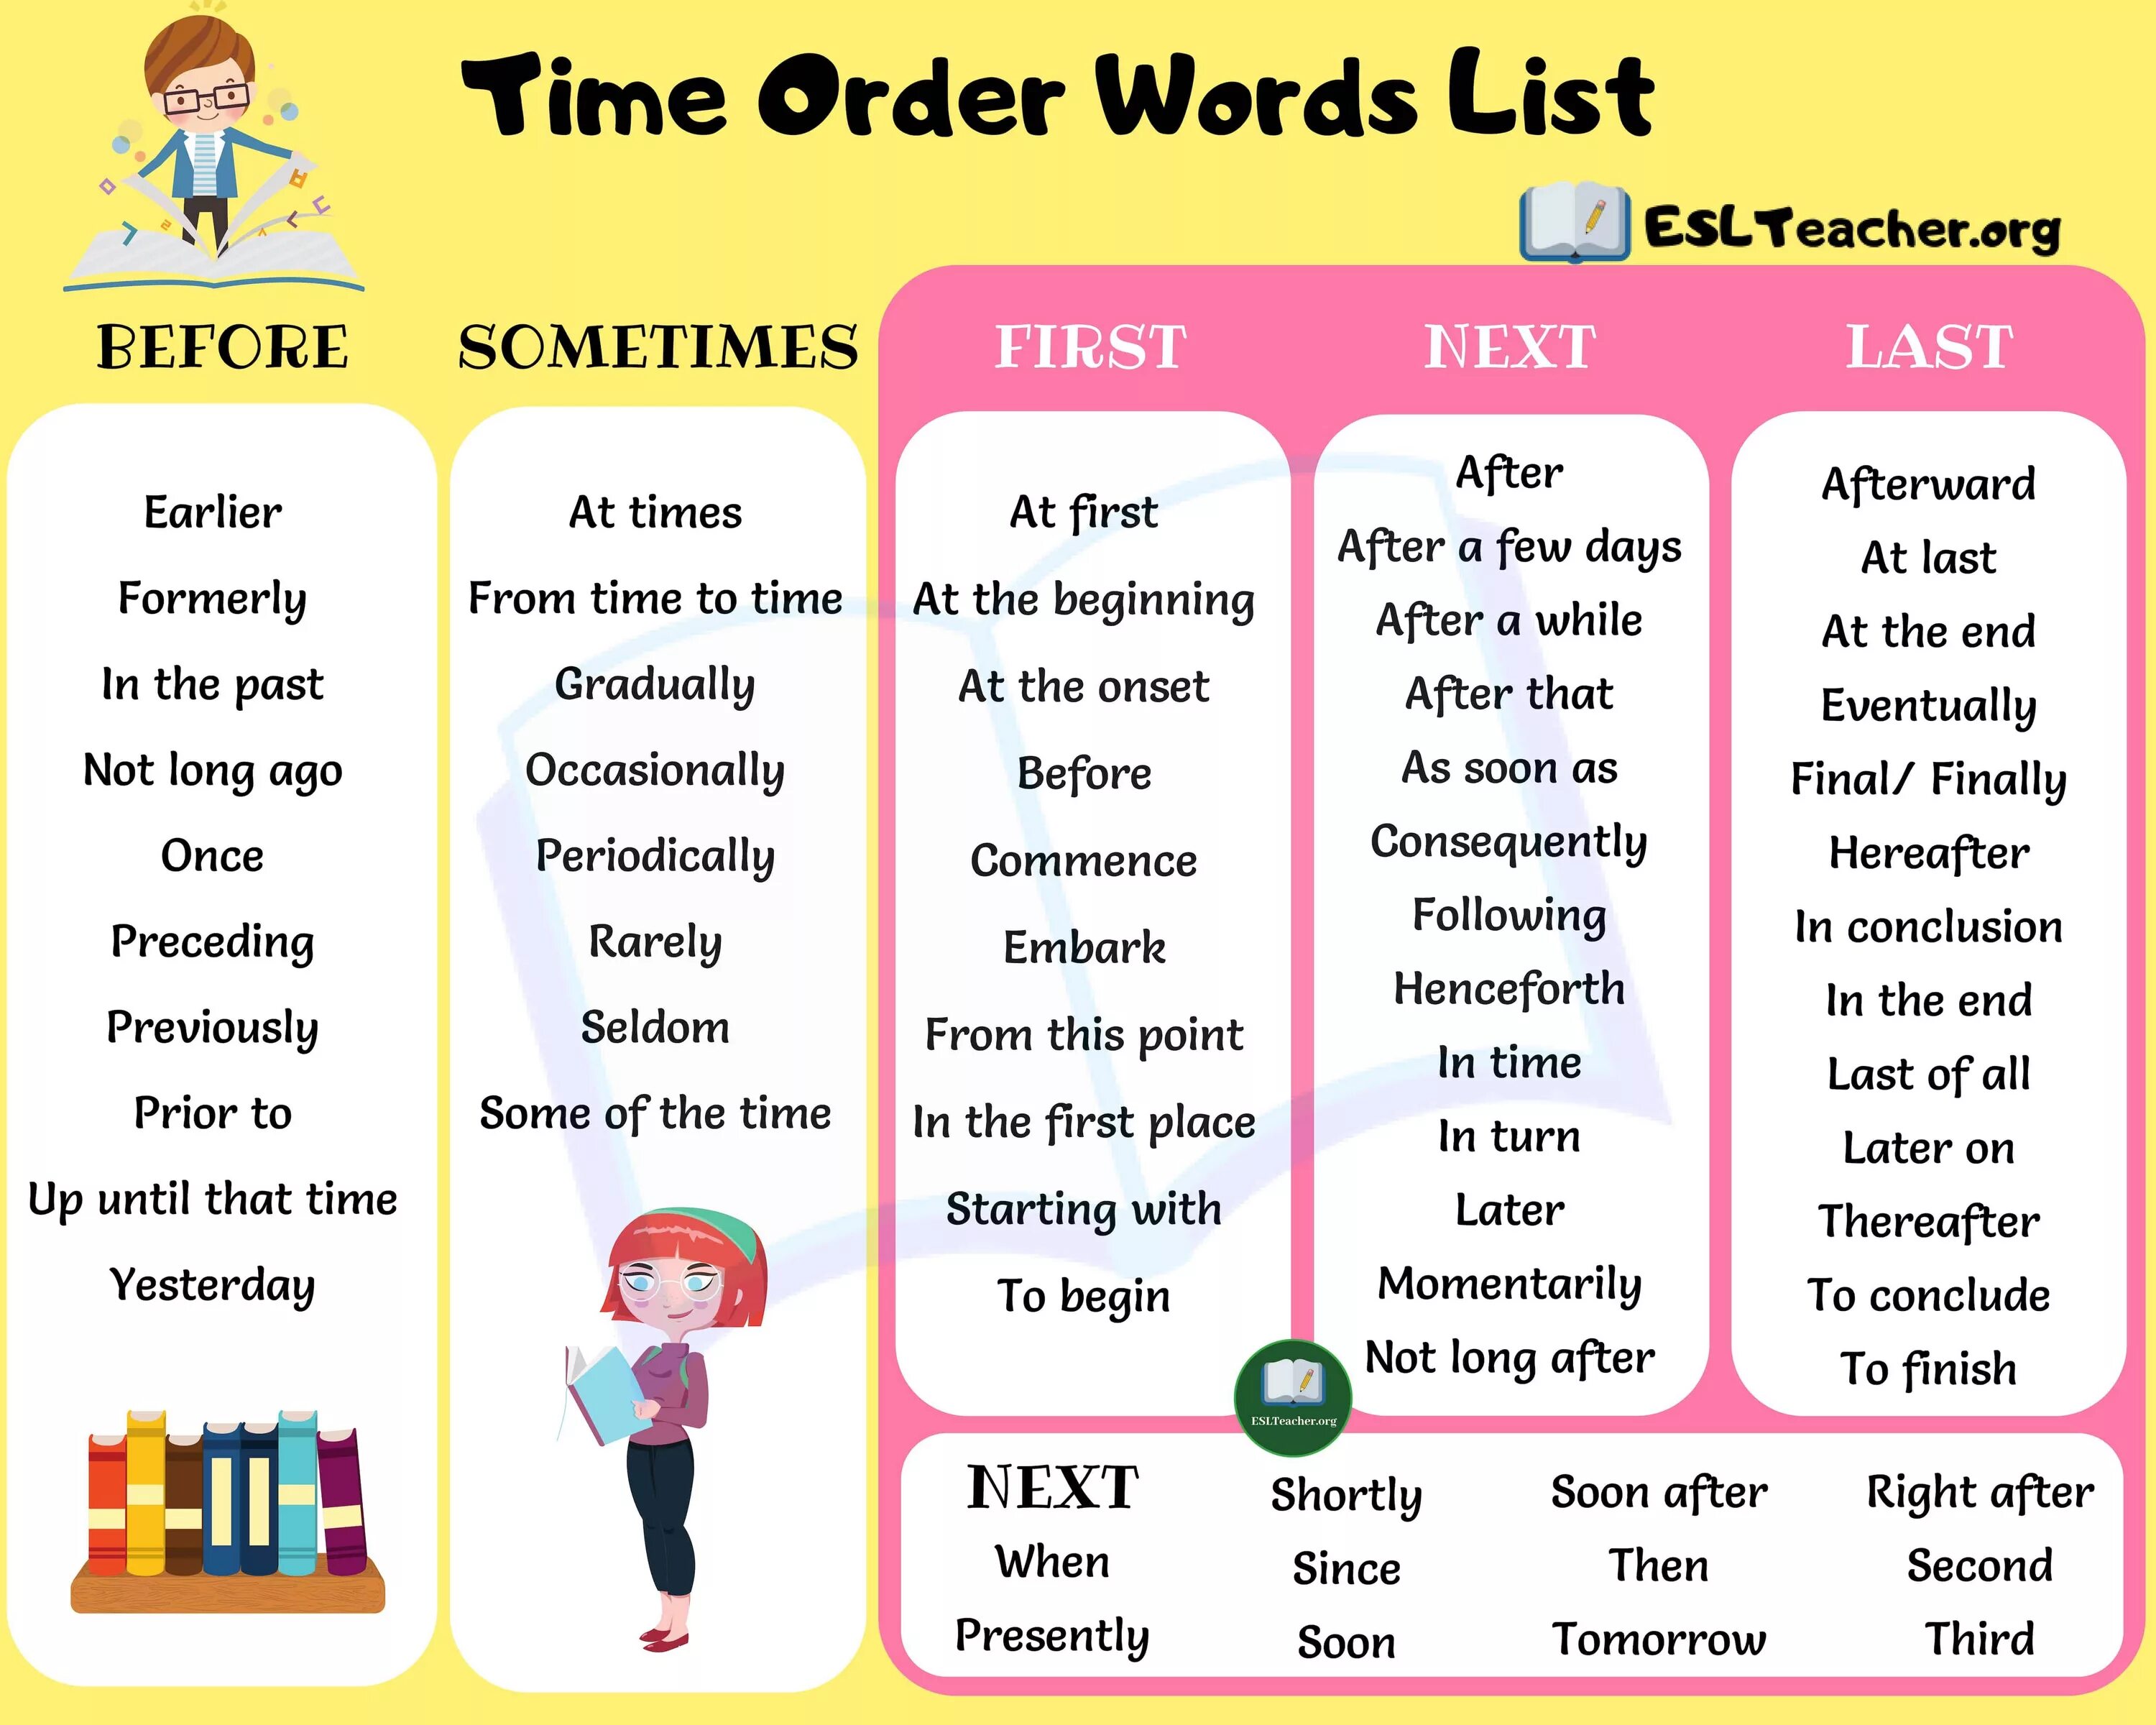 Adverbs word order. Time order Words. Time Words в английском языке. Linking в английском. Connectors в английском языке.